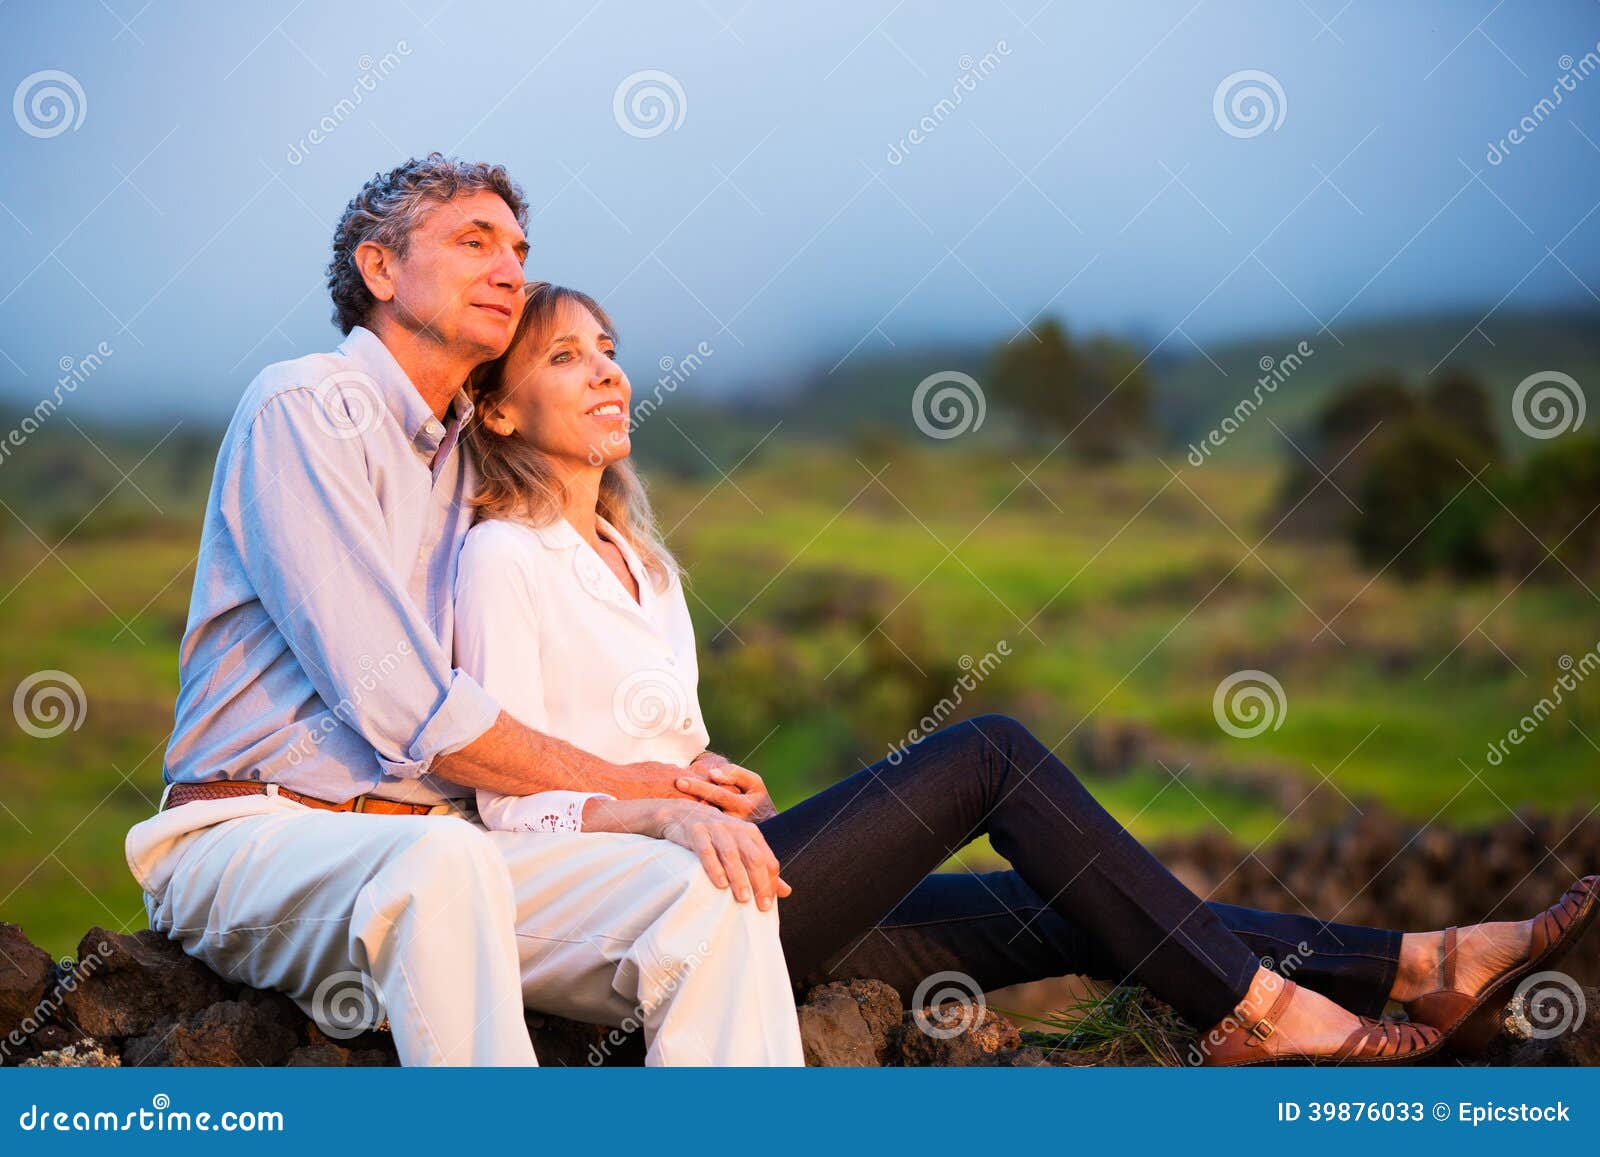 mature middle age couple in love